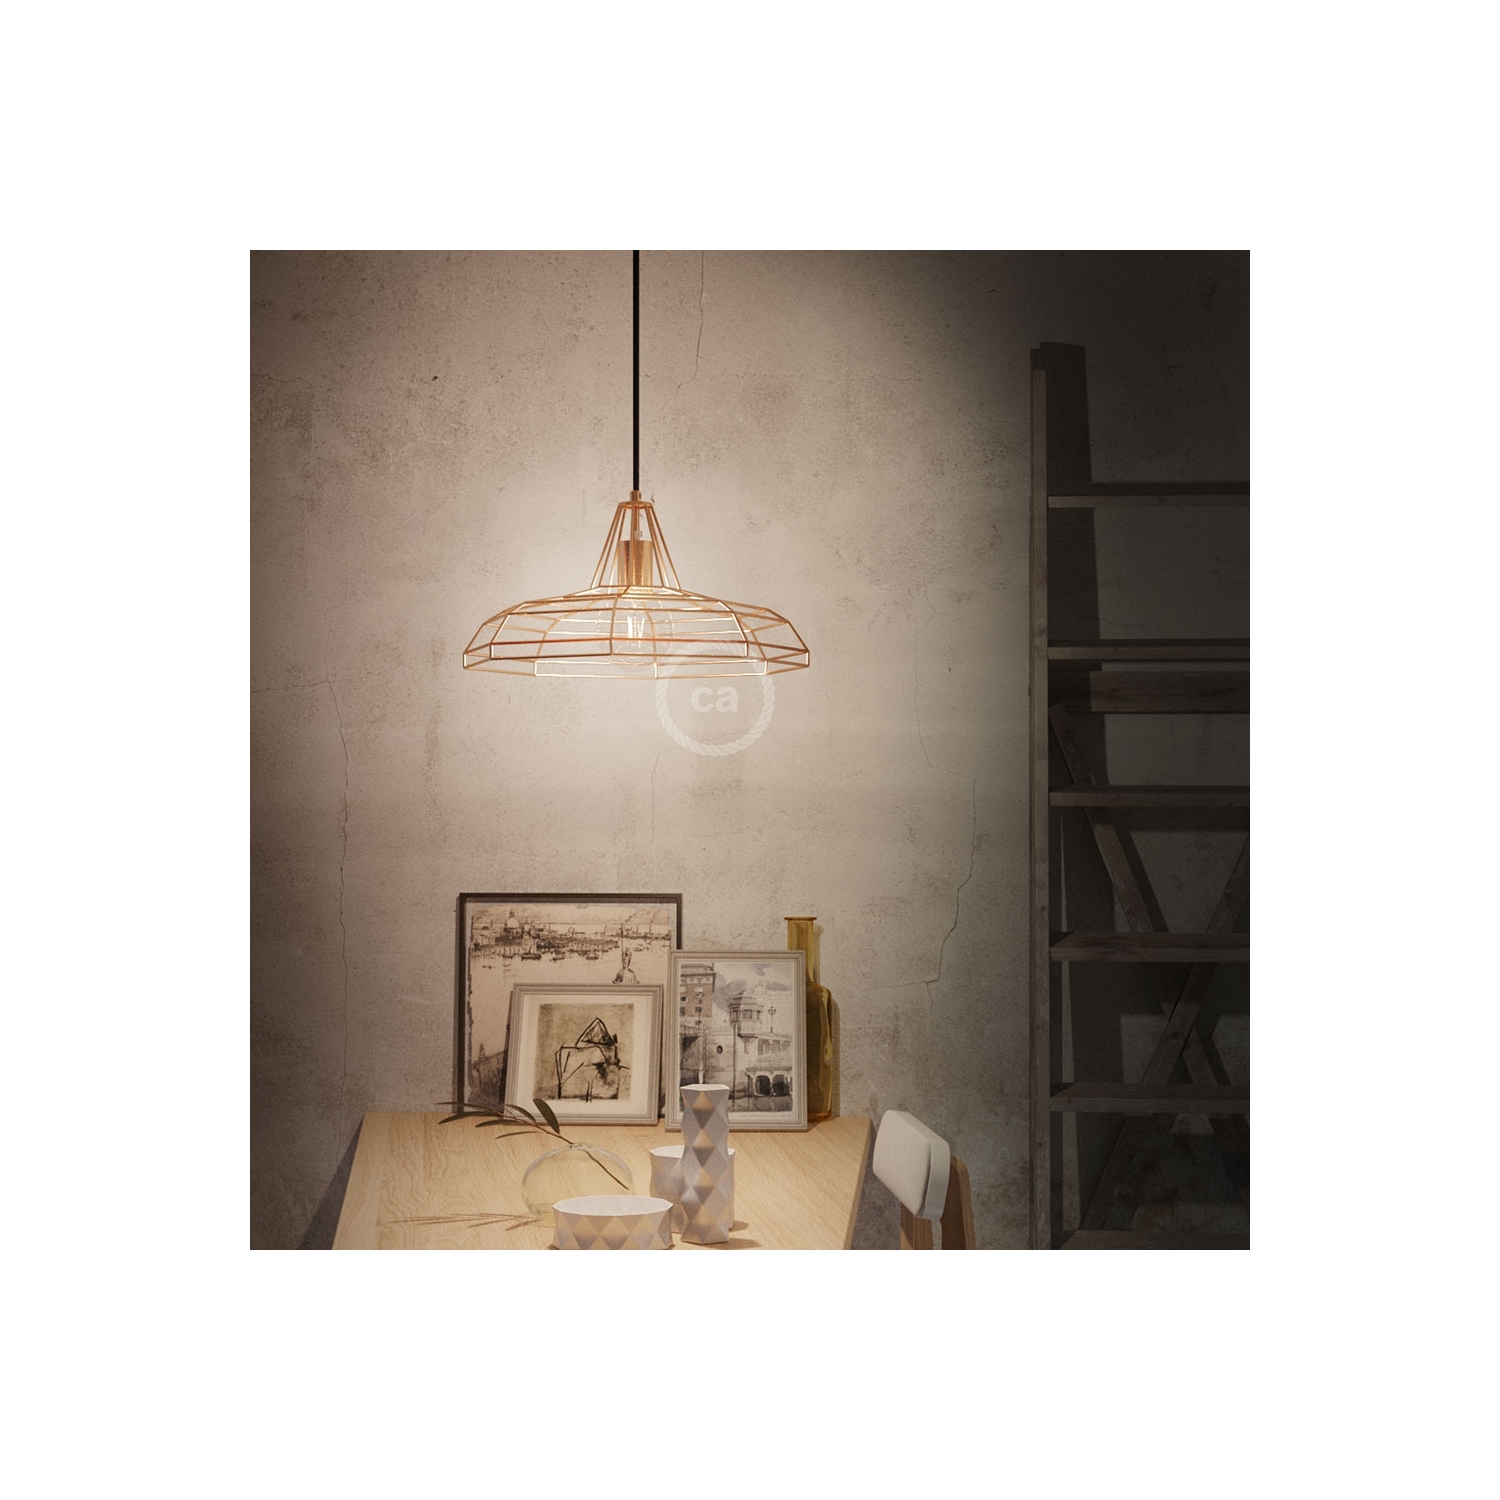 Pendant lamp with textile cable, Sonar lampshade and metal details